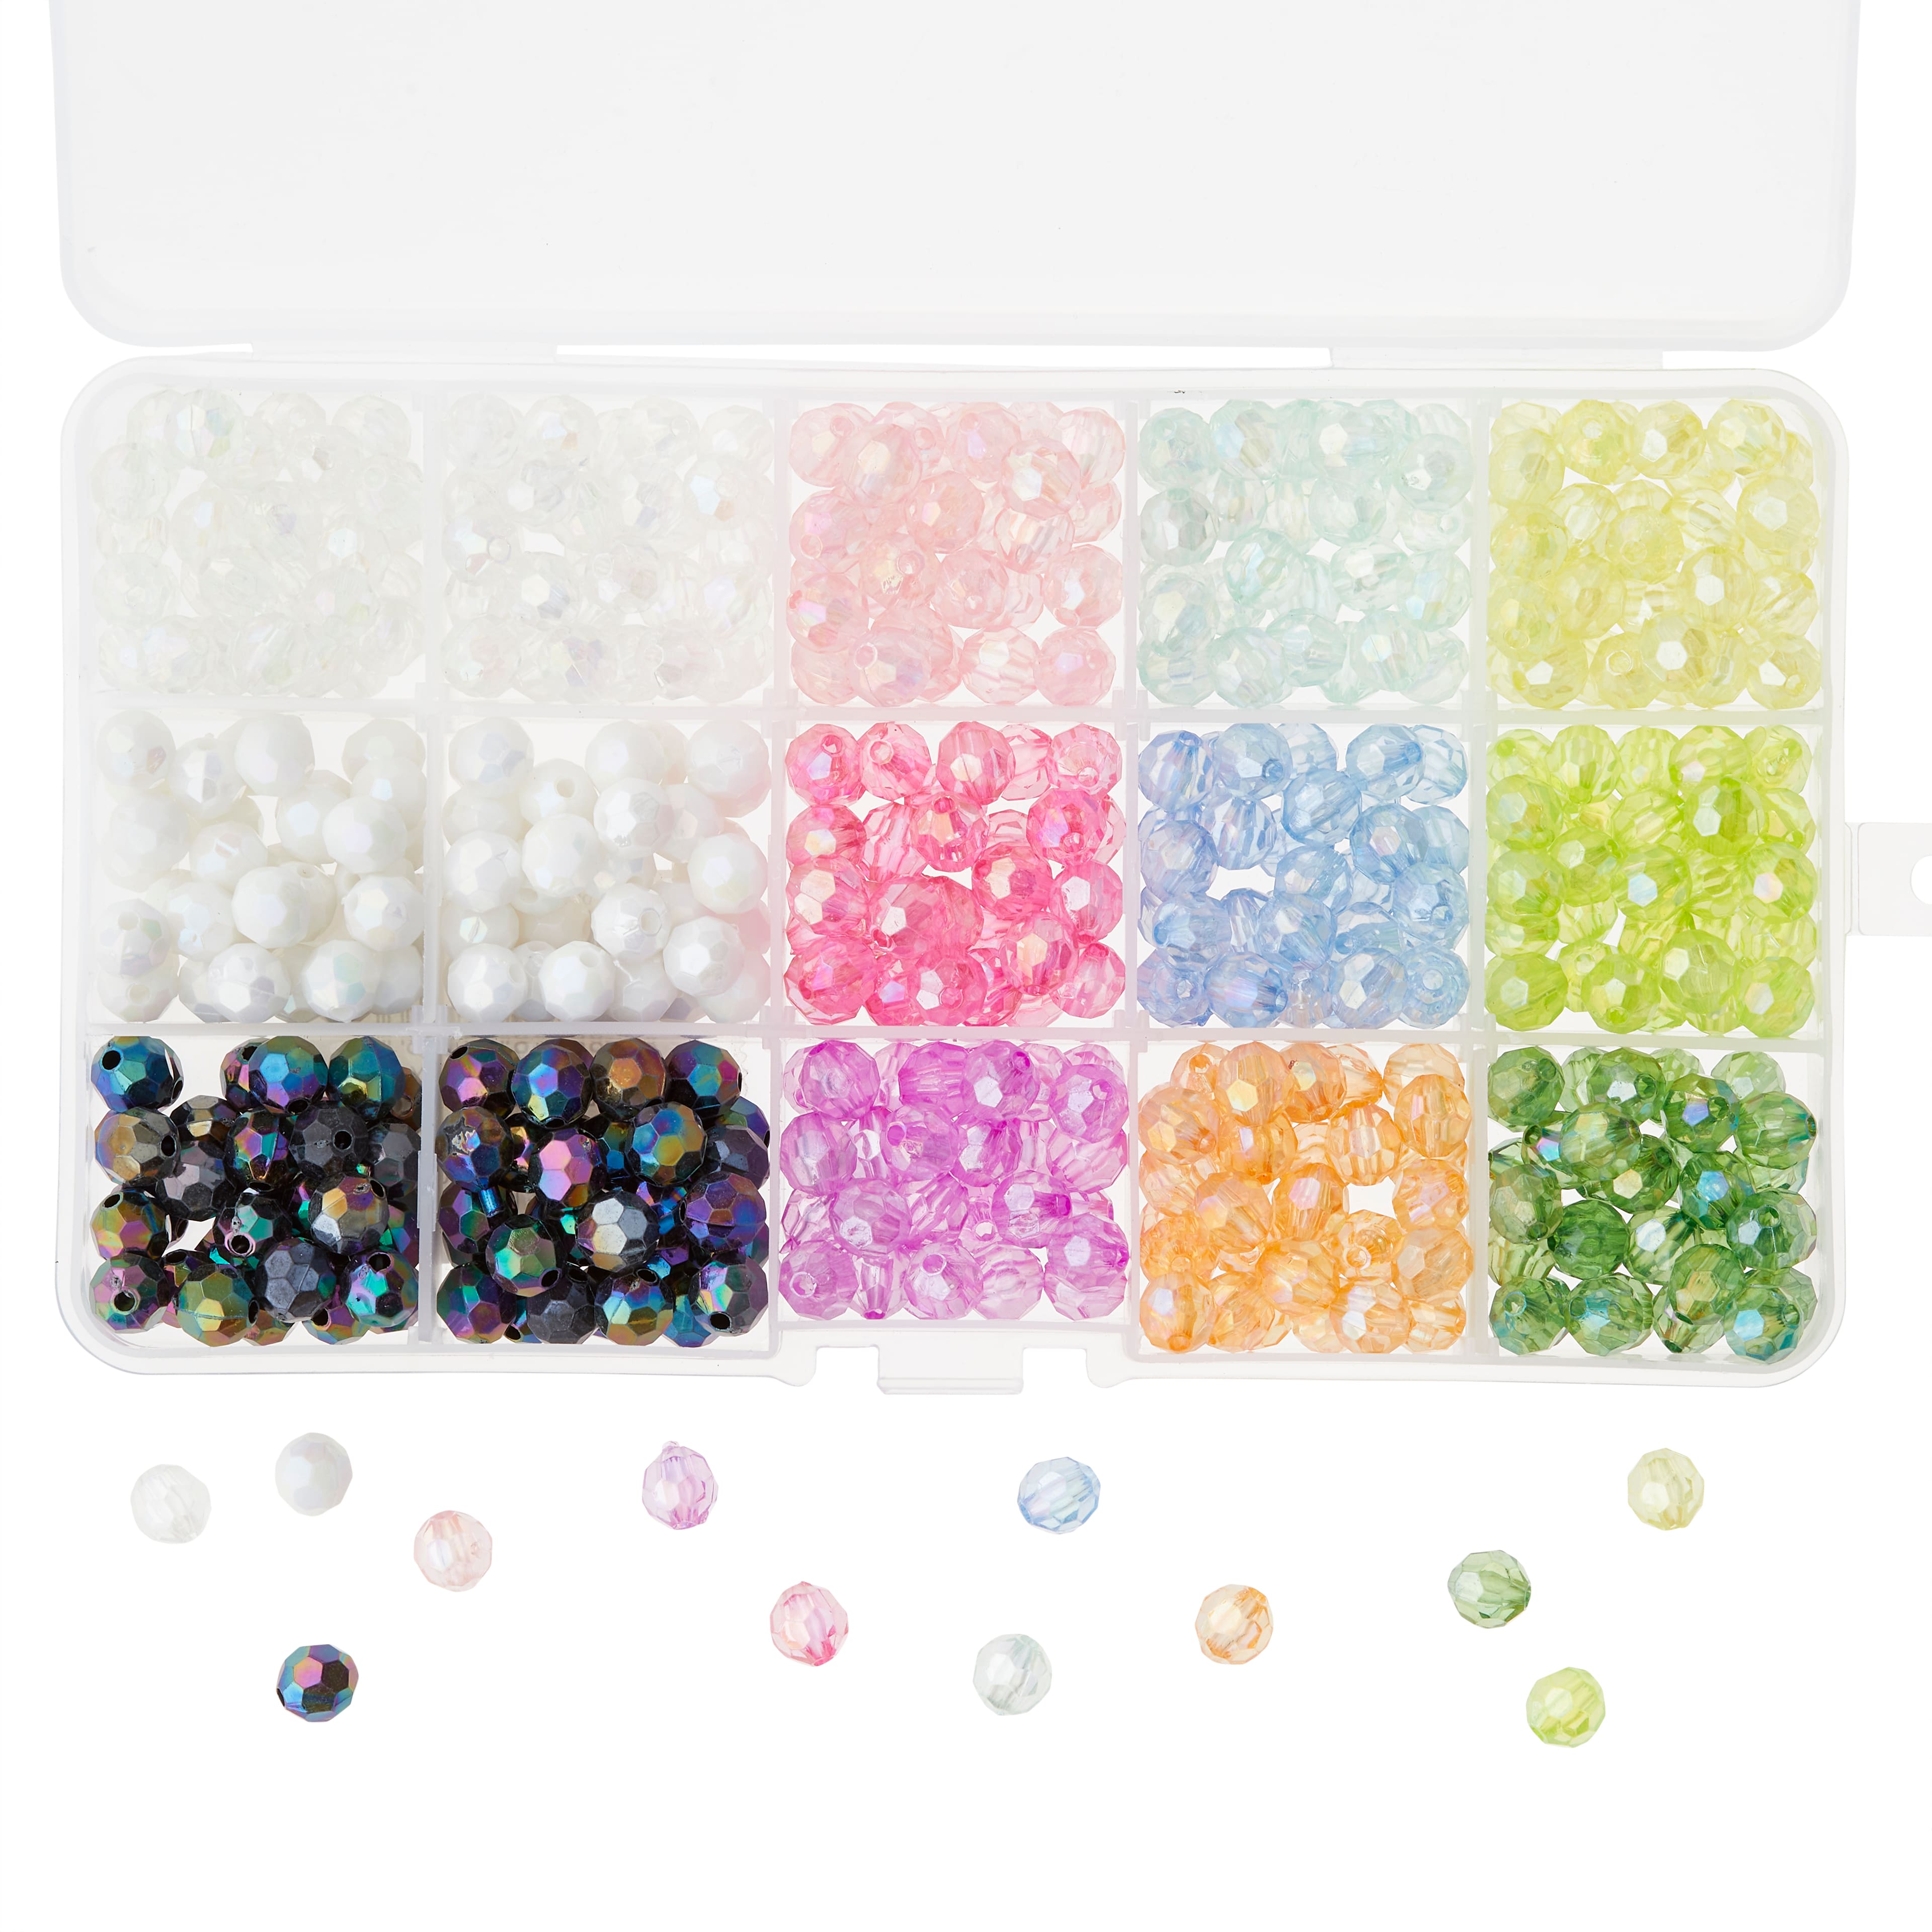 Buy in Bulk - 12 Pack: Faceted Aurora Borealis Crafting Beads Box by ...